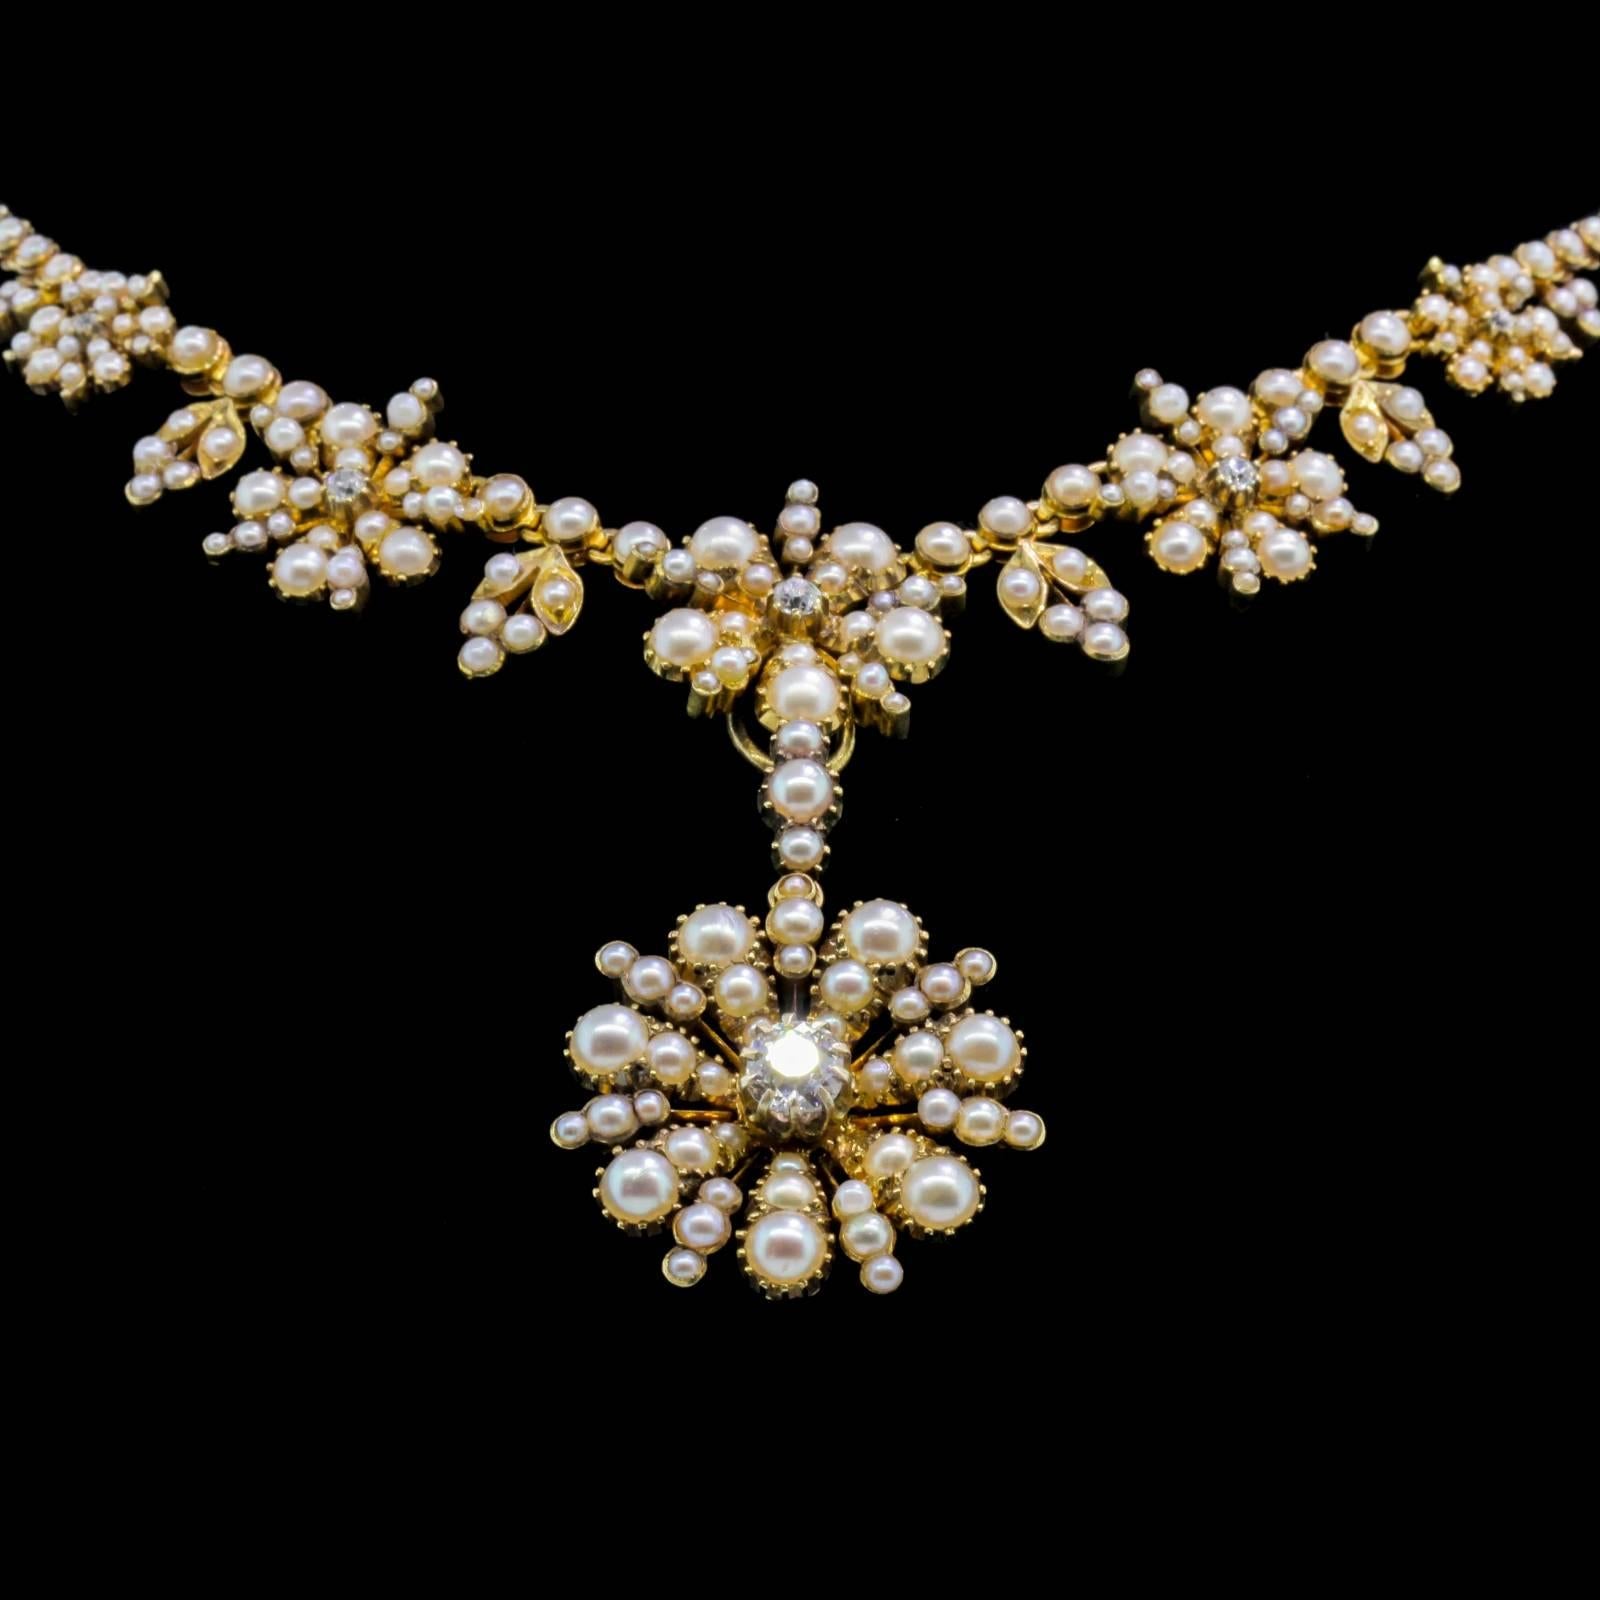 A coveted Victorian beauty!  This lovely 18KT yellow gold Seed Pearl Necklace was created in two sections. One with five Seed Pearl florets centering an Old Cut Diamond, and the second section is a detachable, dangling larger Seed Pearl floret,